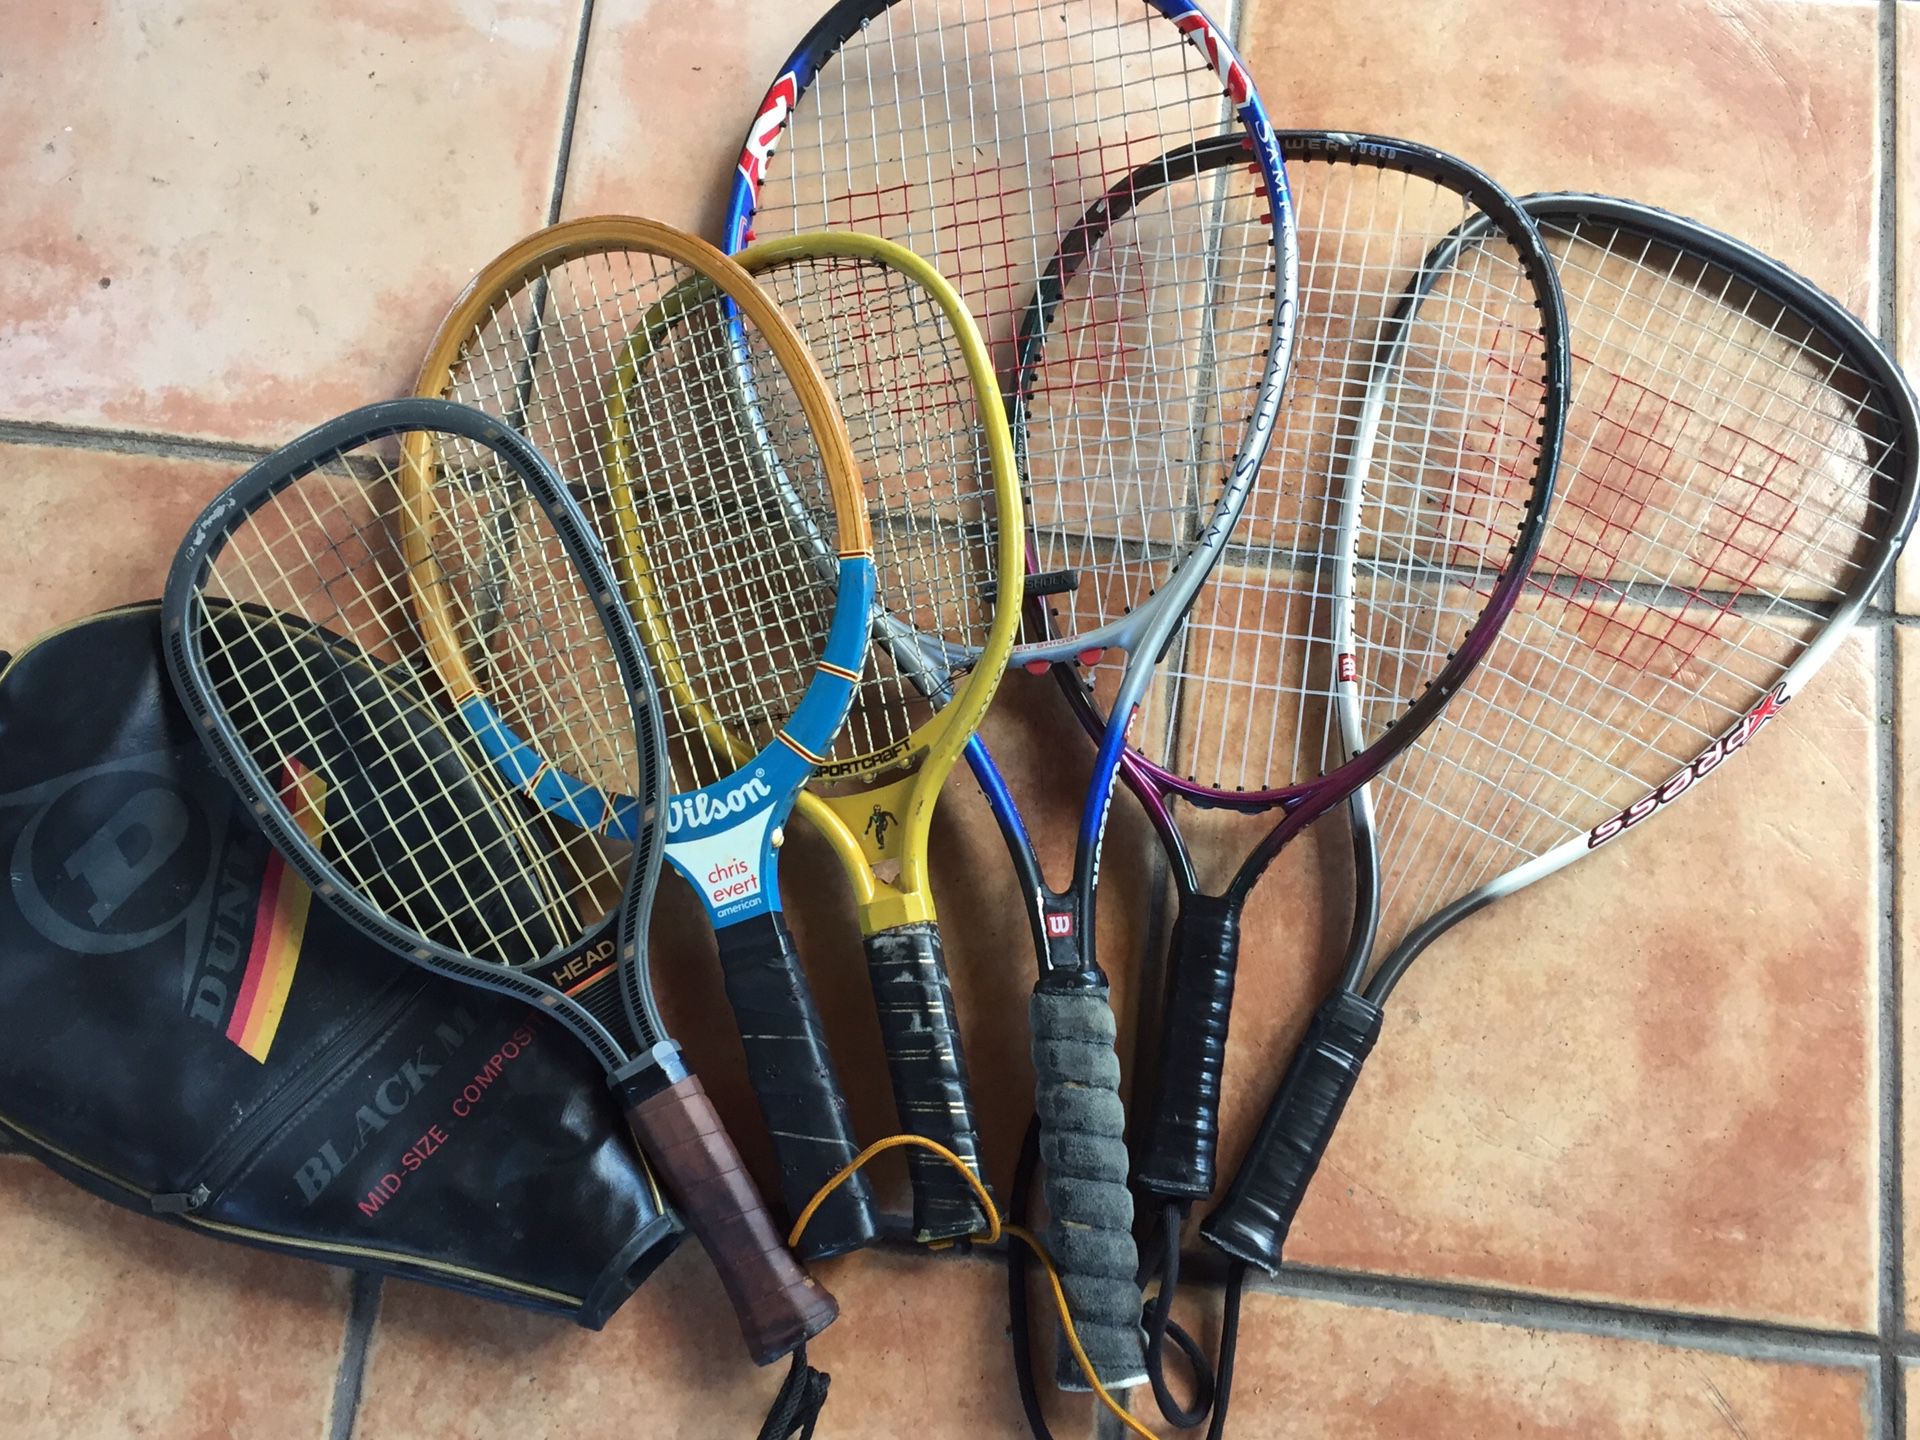 Tennis/Racked ball rackets all for $20